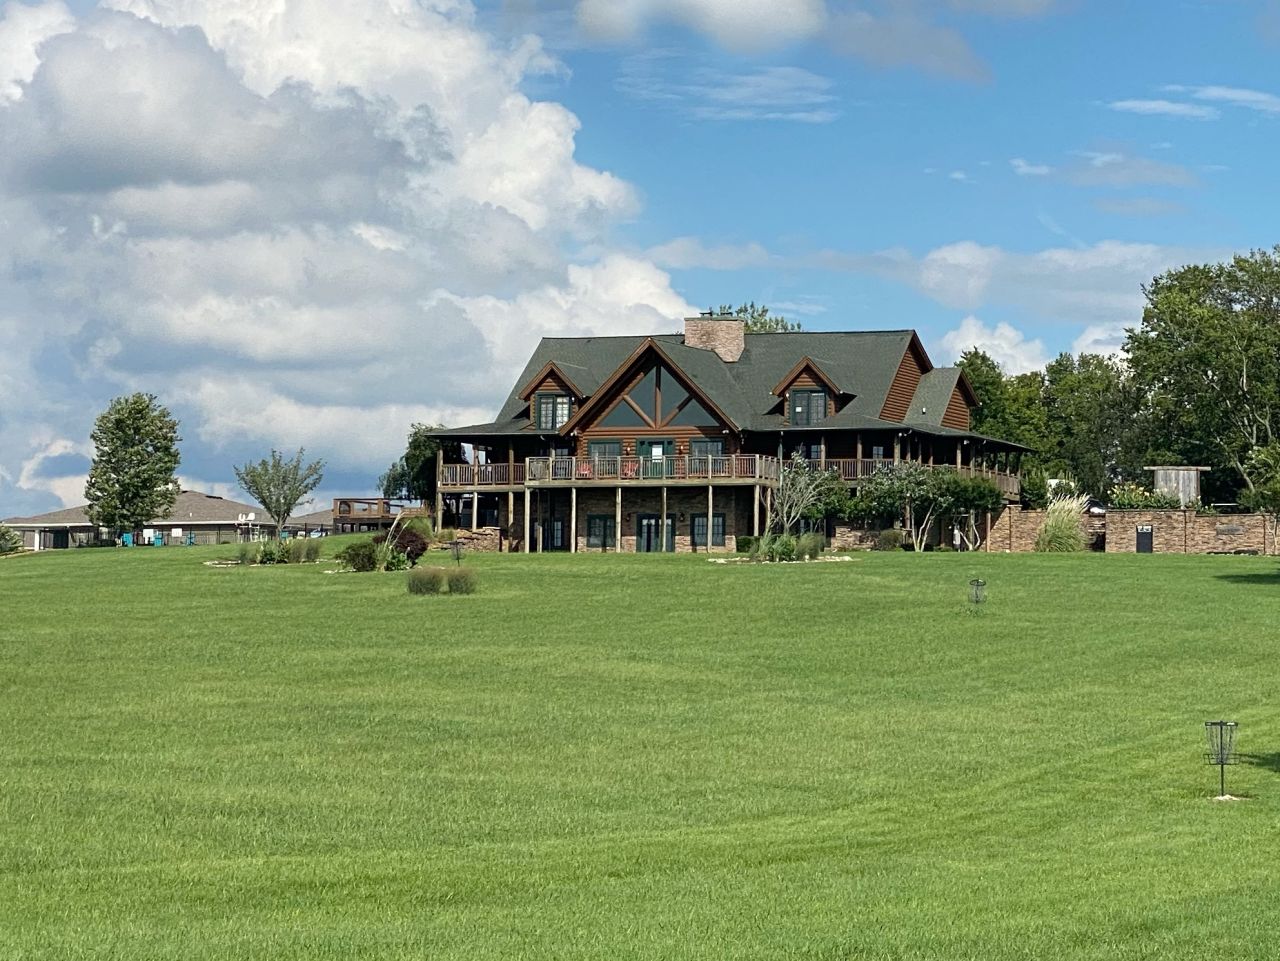 Fit Farm retreats take place at Rock Springs Retreat Center in Castalian Springs, Tennessee.